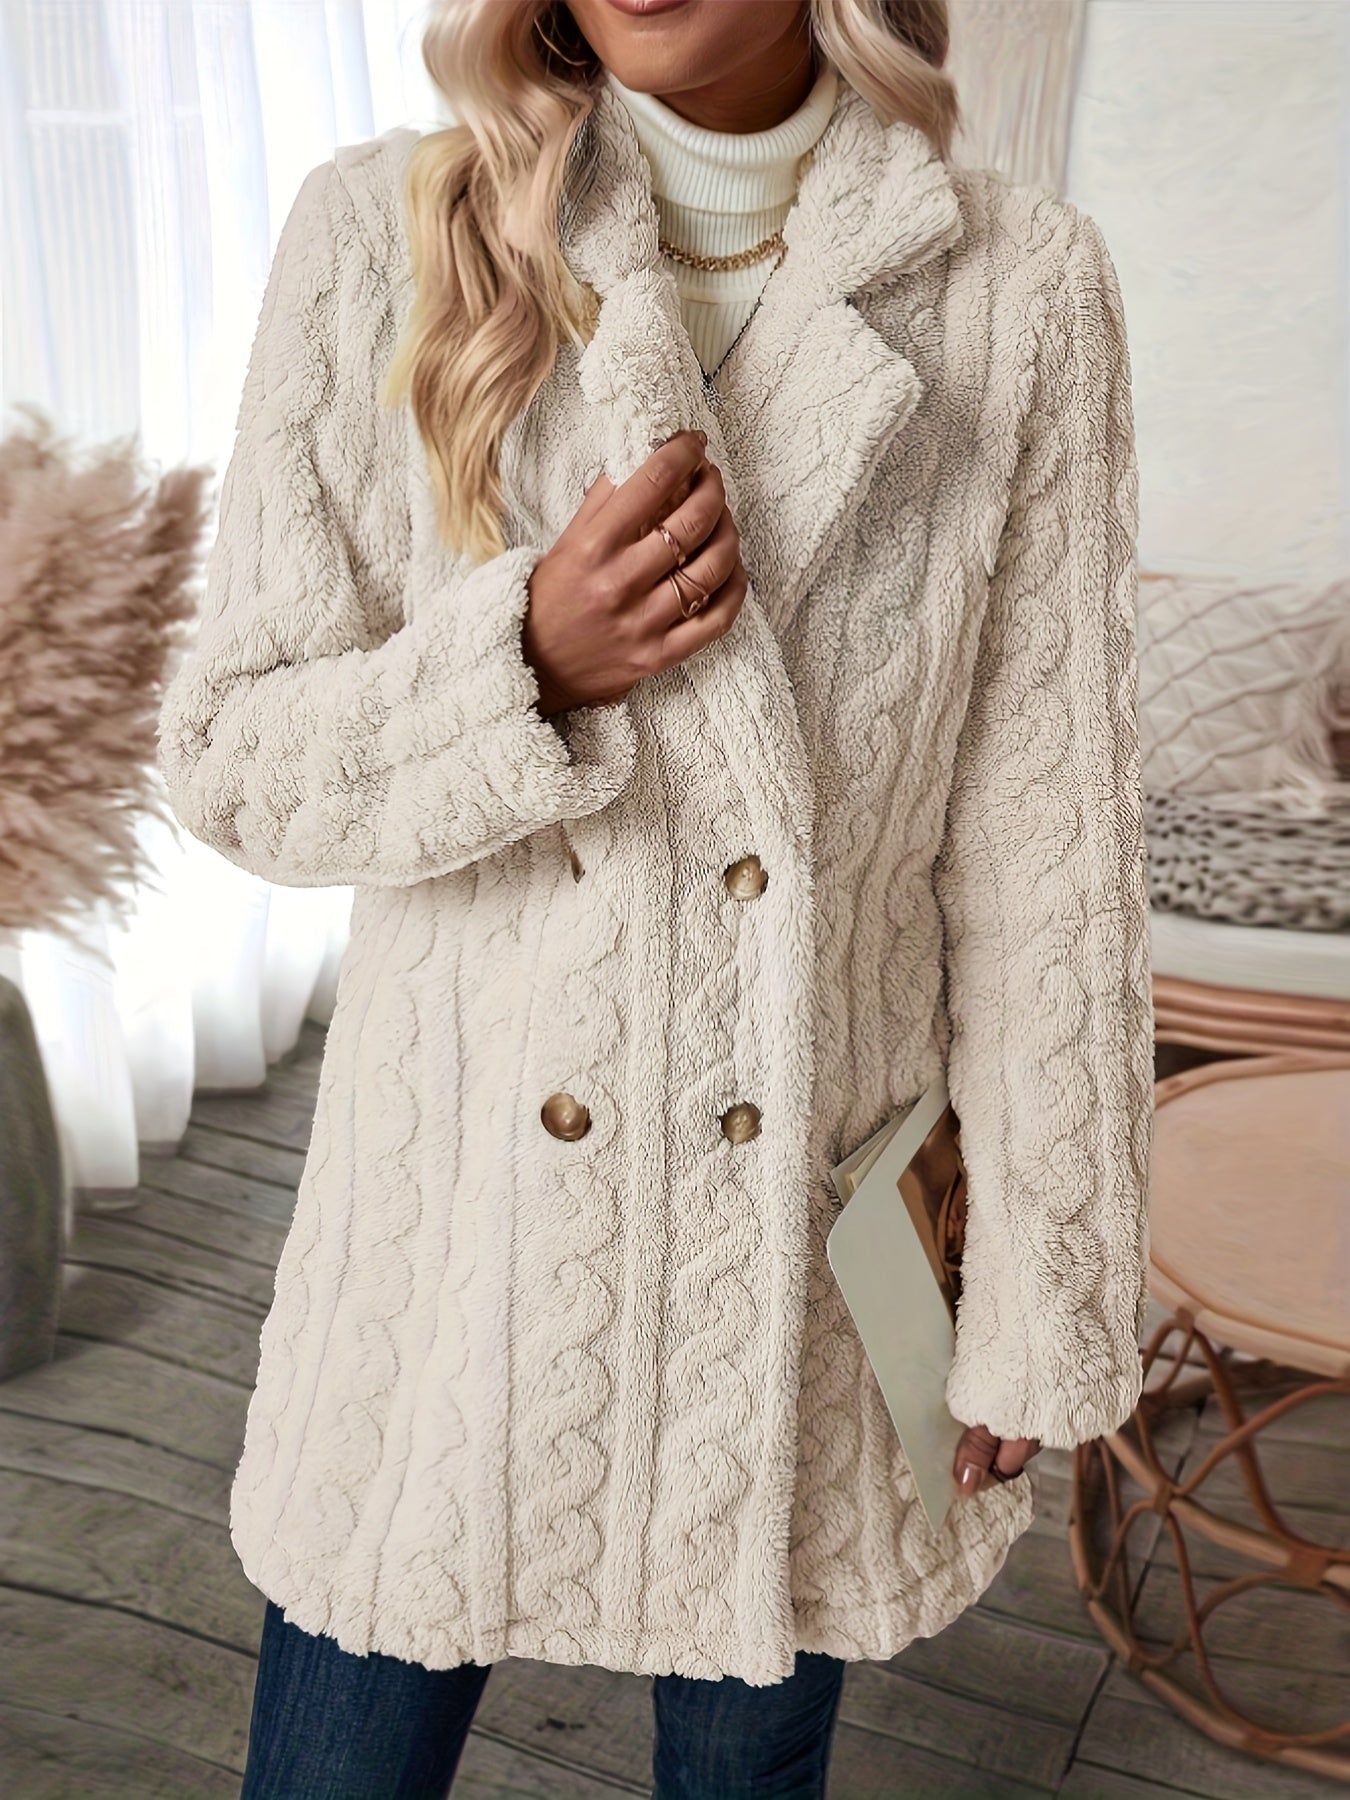 Double Breasted Lapel Teddy Coat, Versatile Long Sleeve Textured Thermal Winter Outwear, Women's Clothing